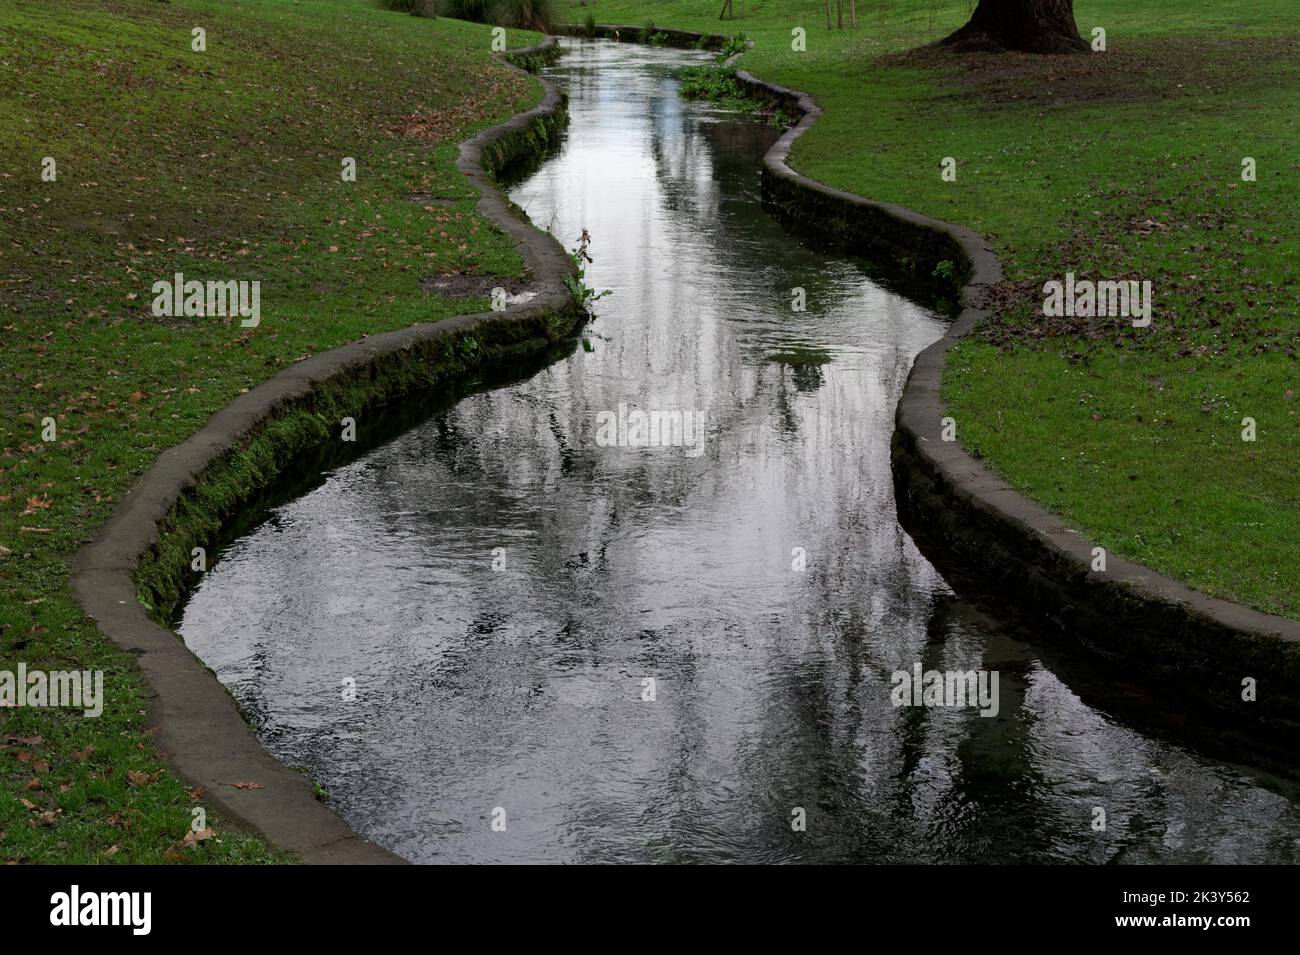 A stream has been contained by concrete sides to ramble through a public park Stock Photo